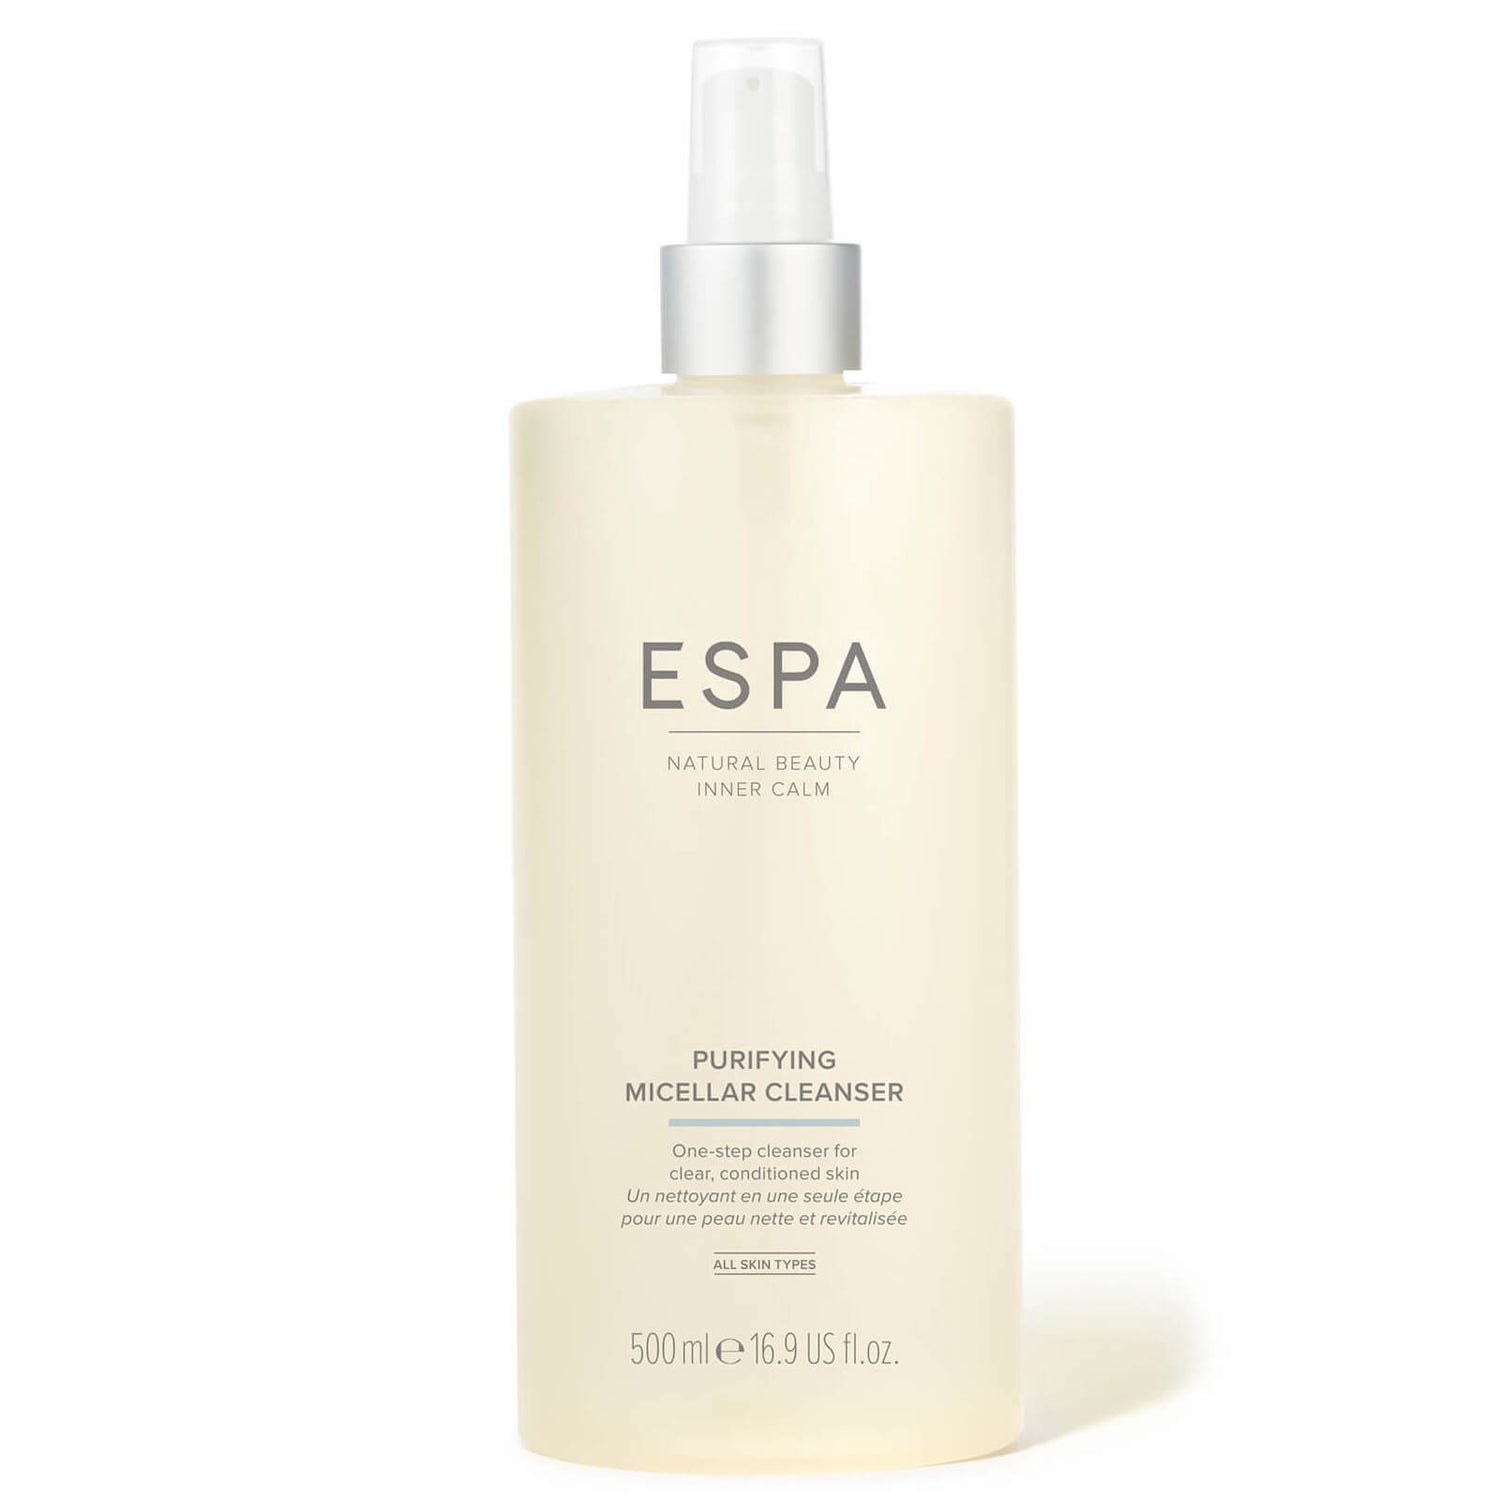 ESPA Purifying Micellar Cleanser Supersize 500ml